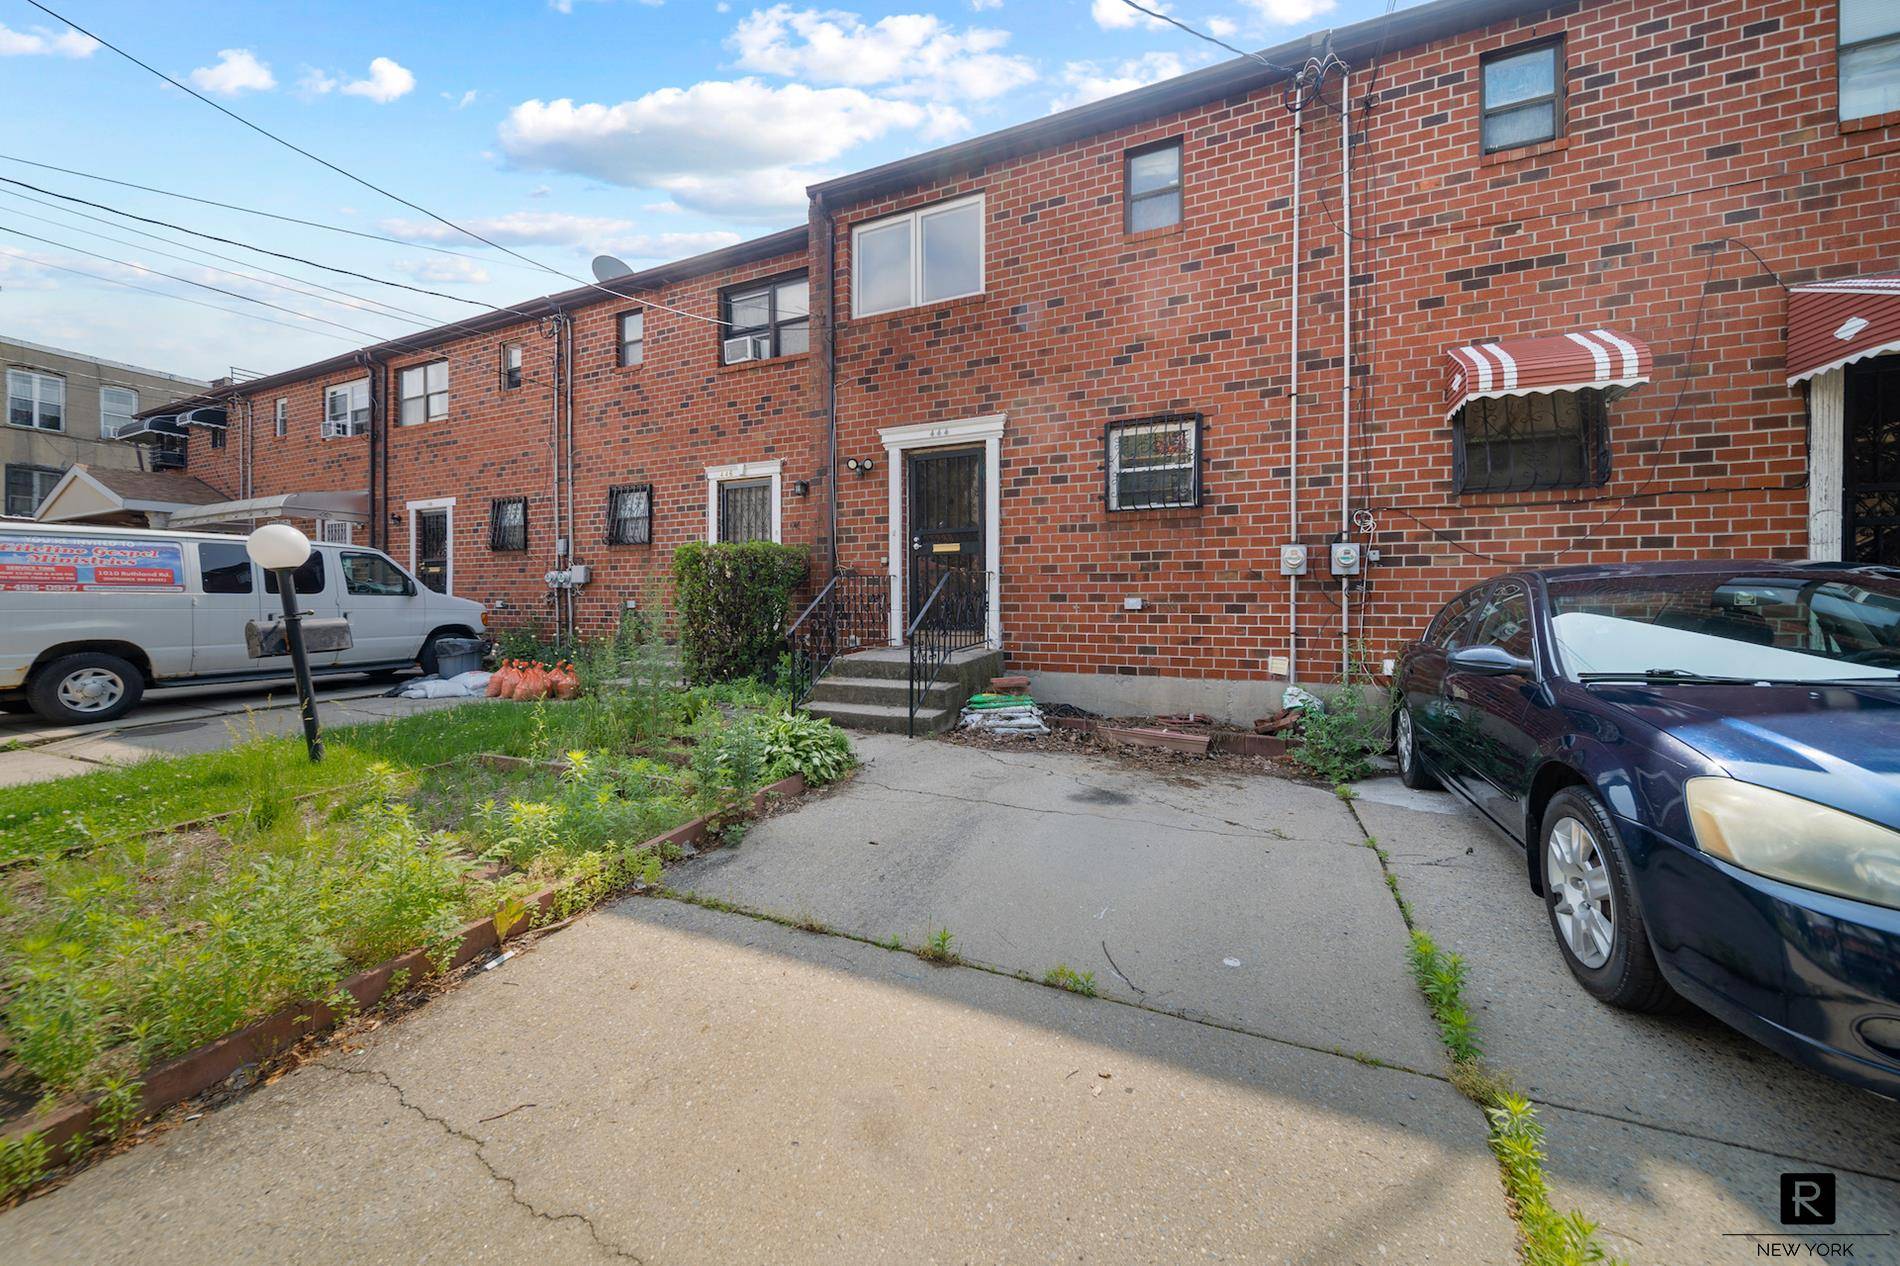 Beautiful brick One family home located on a quiet tree lined block in the vibrant neighborhood of East New York.